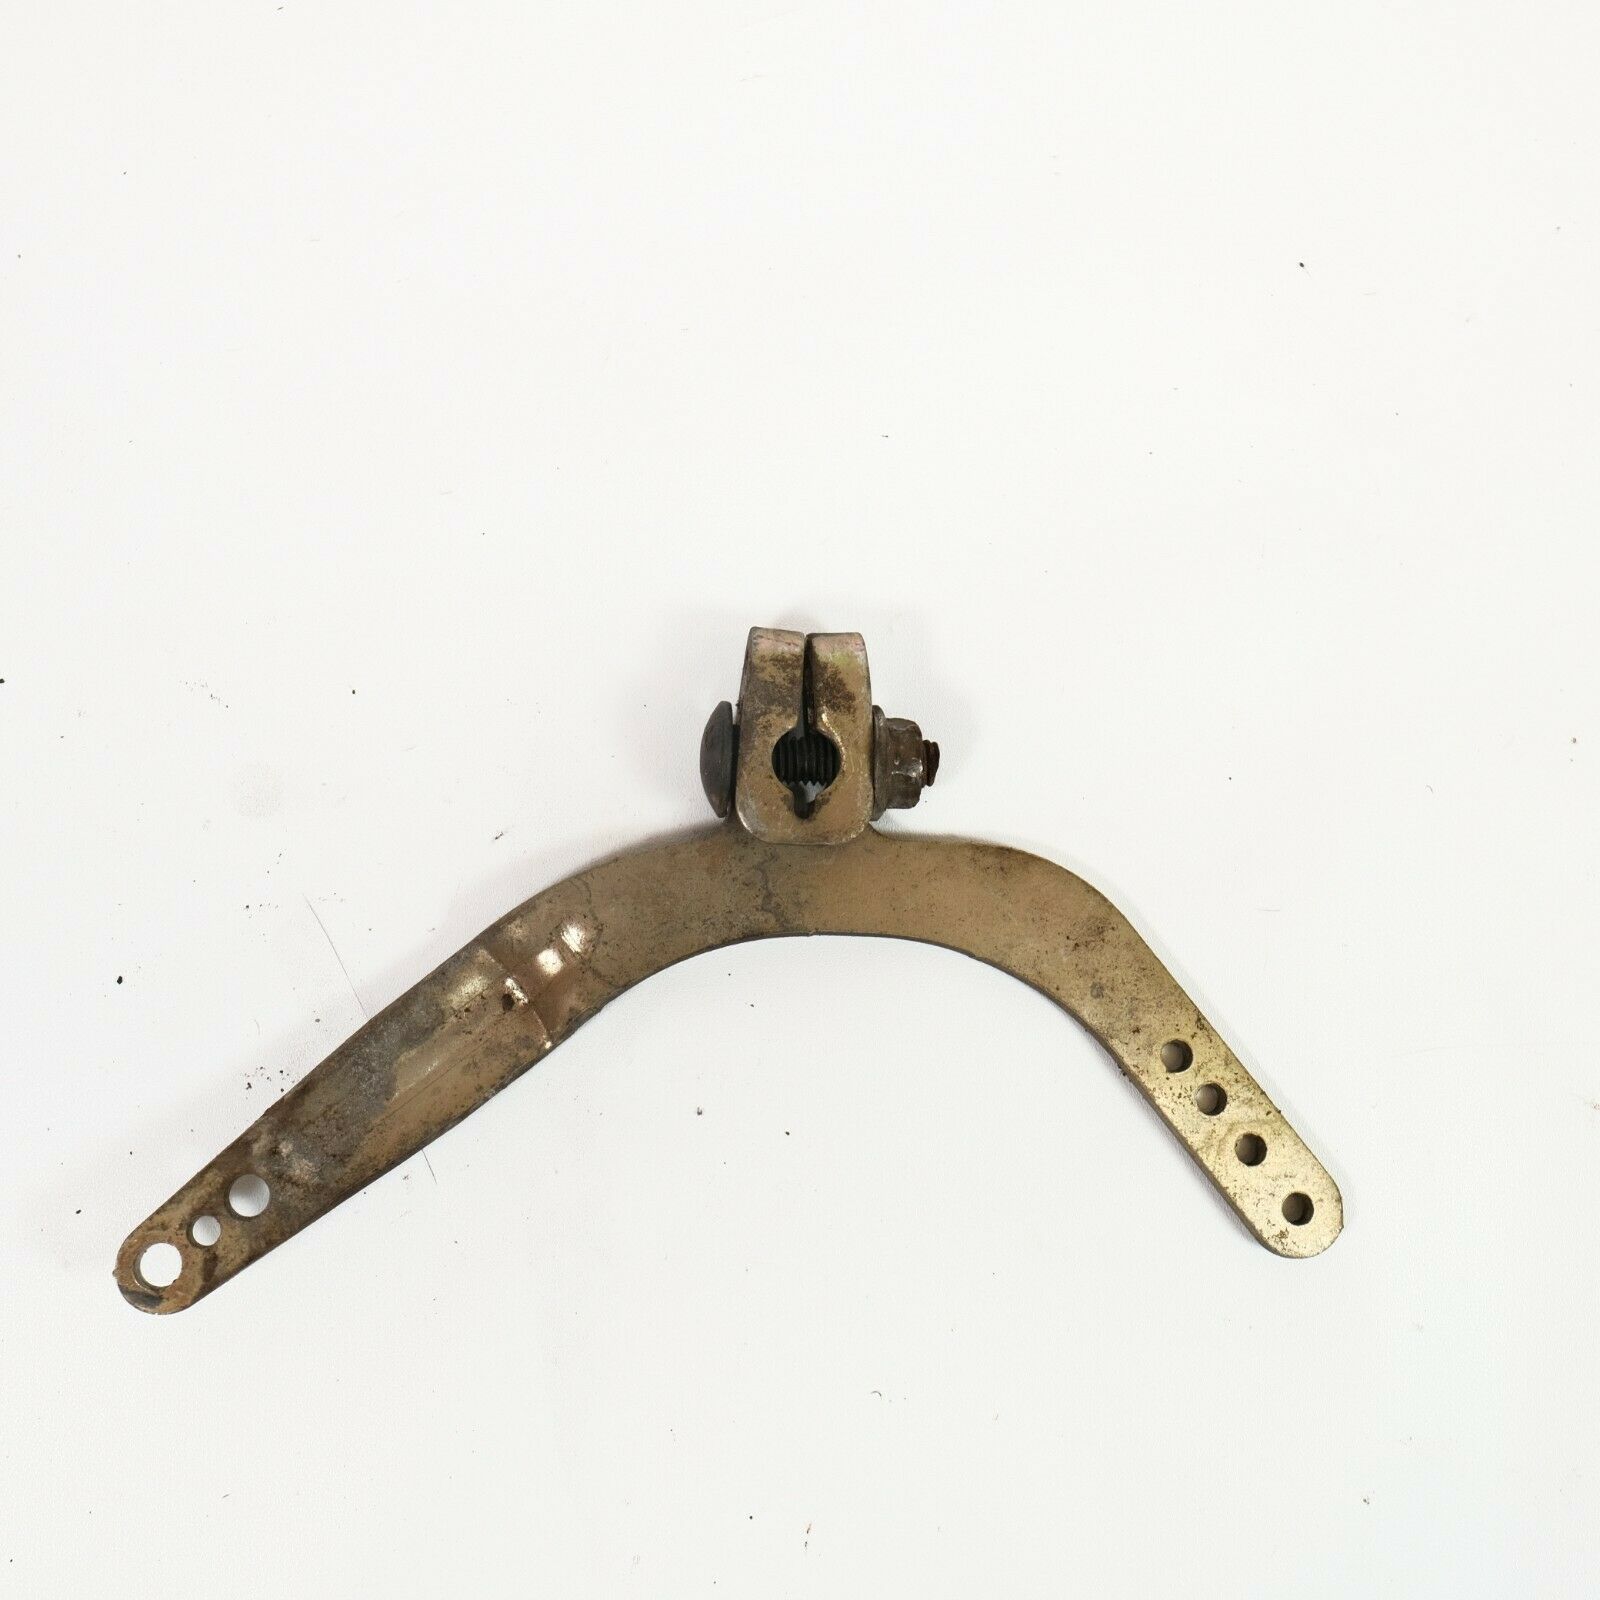 Used John Deere M132432 Governor Lever fits F680 - $5.00